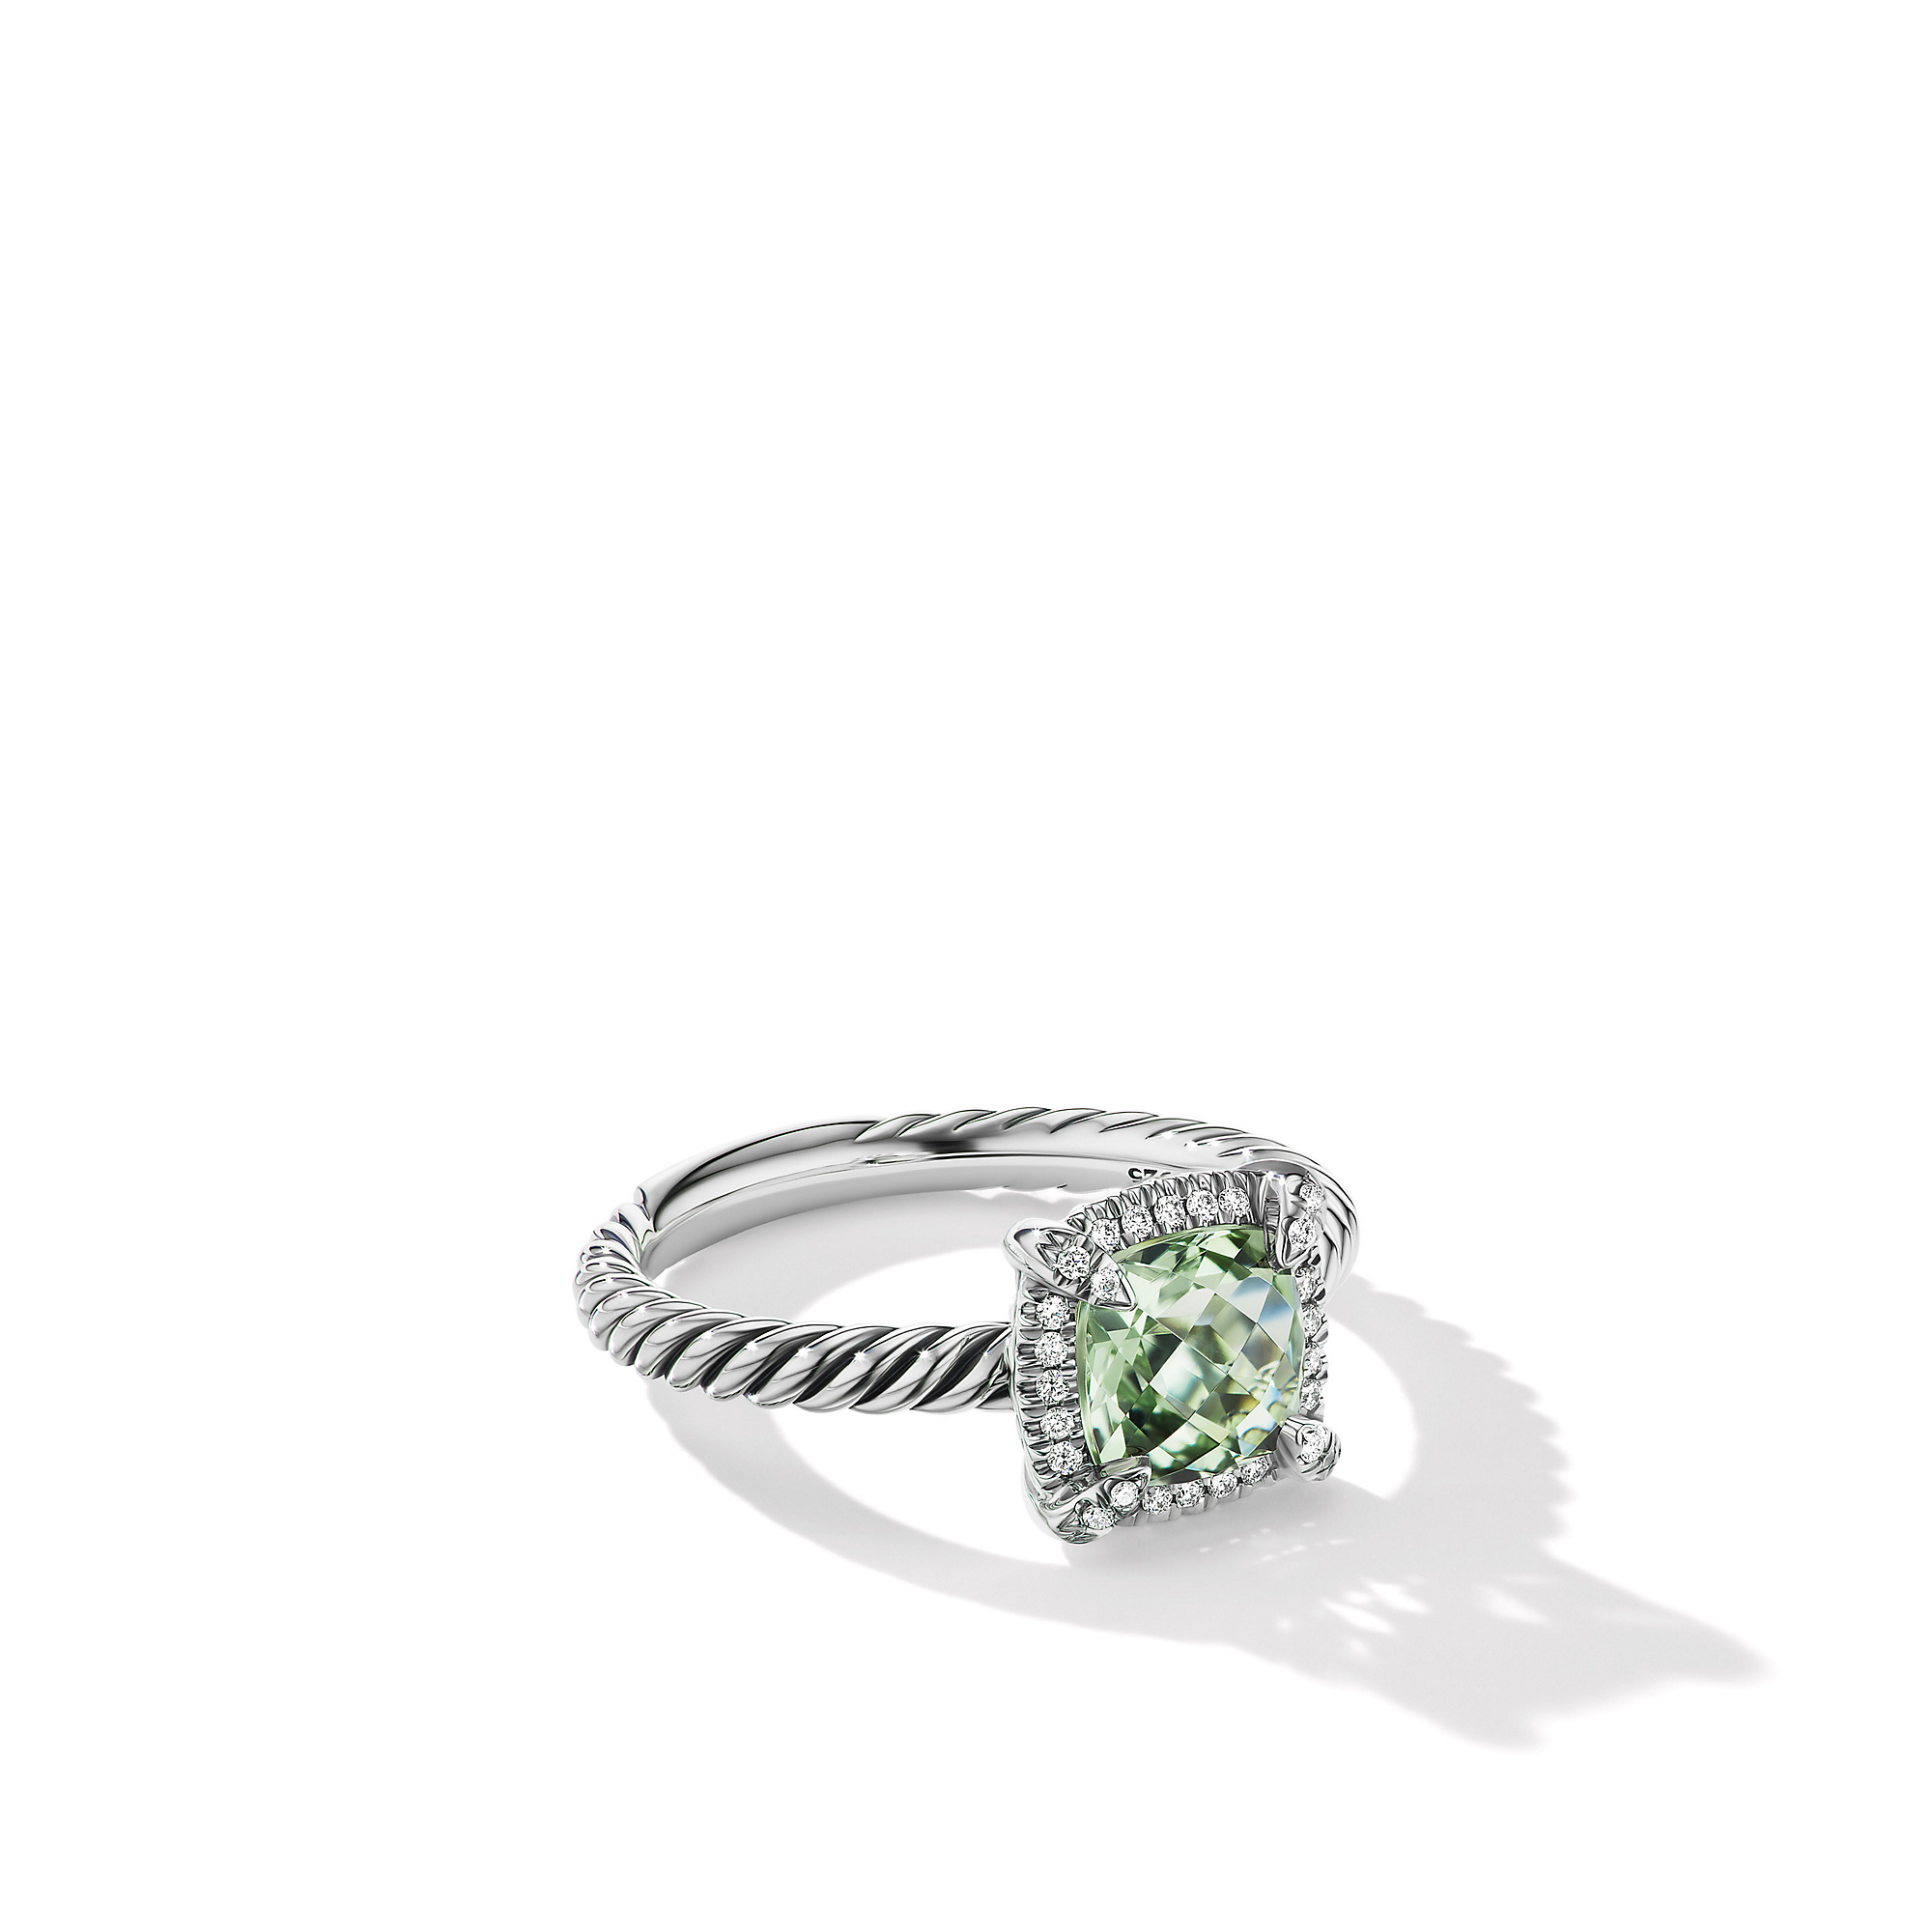 Petite Chatelaine® Pavé Bezel Ring in Sterling Silver with Prasiolite and Diamonds, 7mm